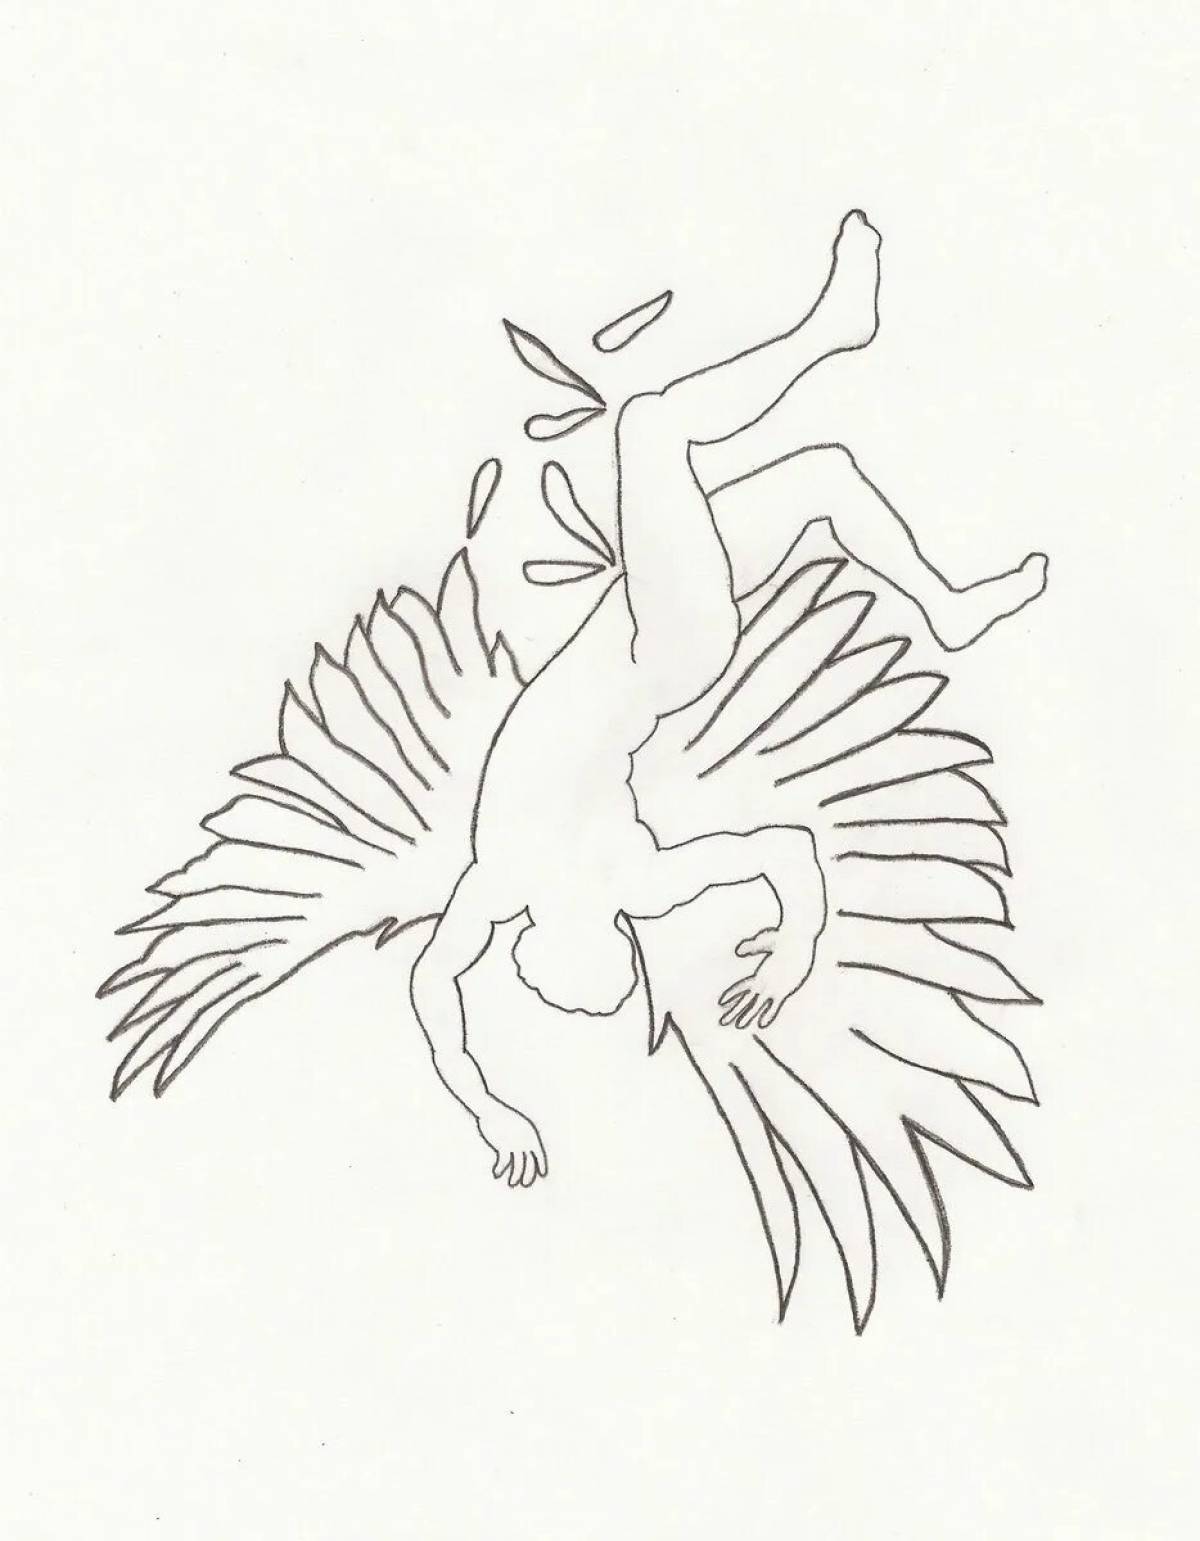 Dedalus and Icarus coloring page with colorful accents